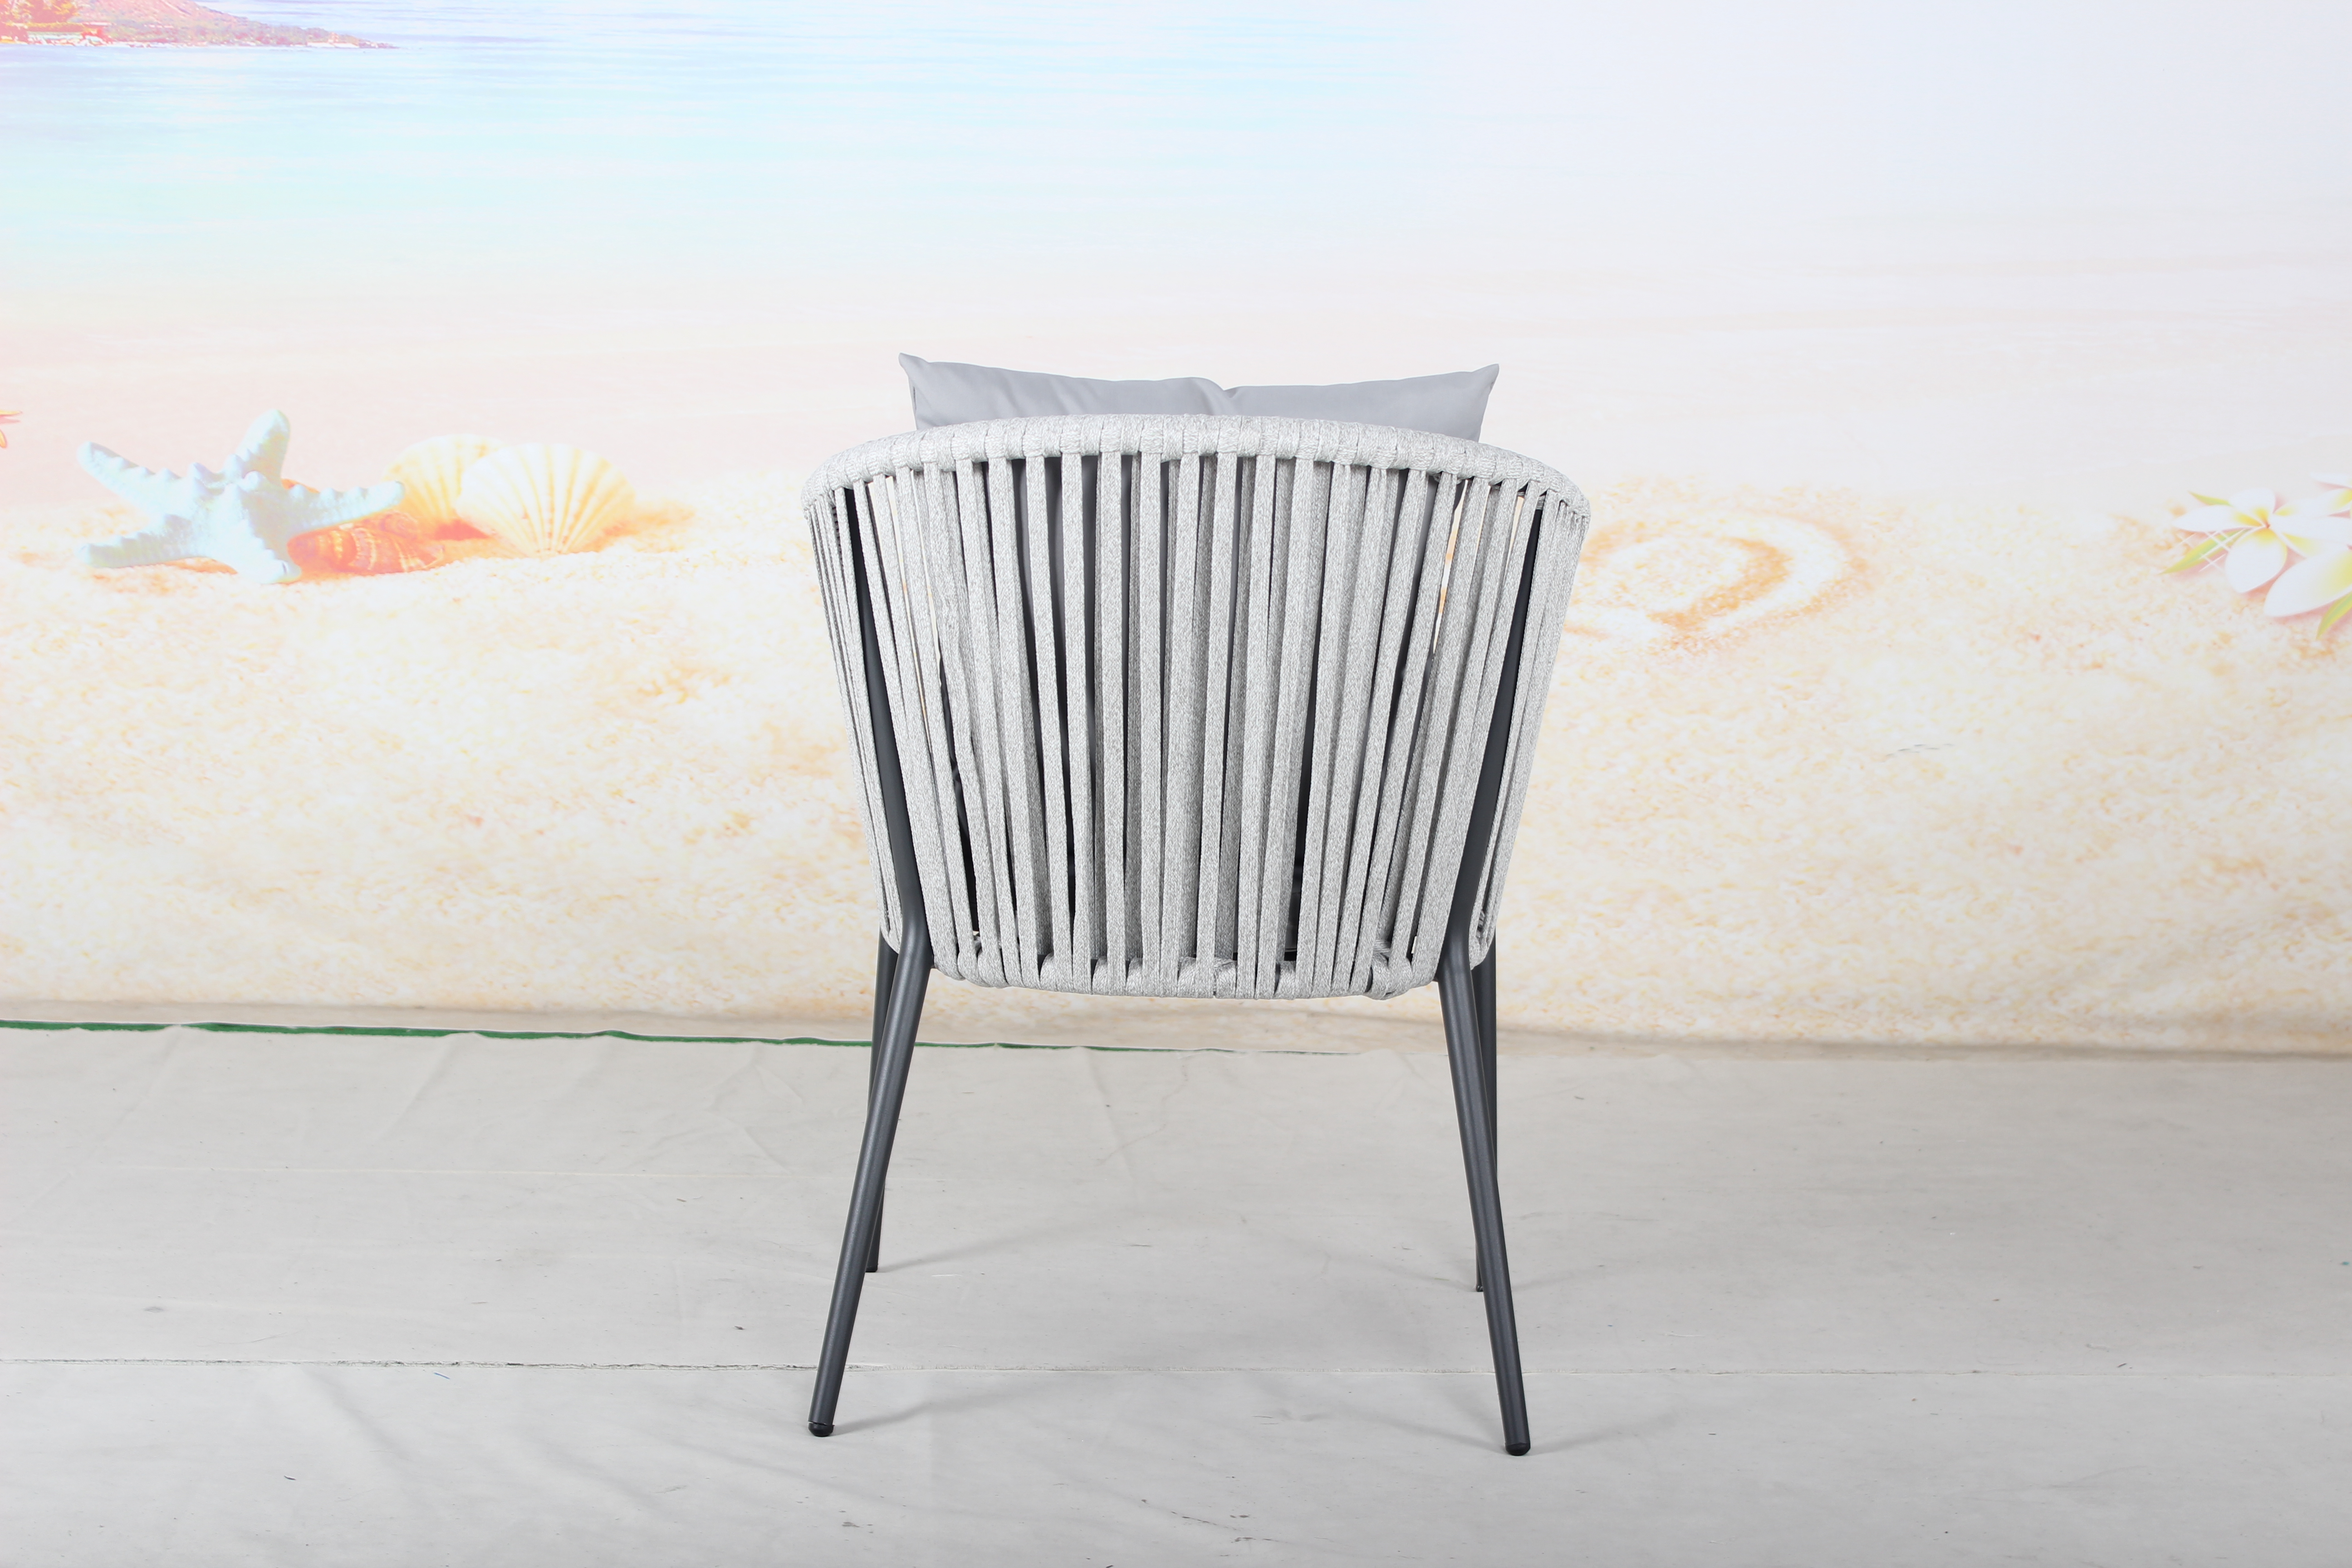 Grey rope garden patio dining chair